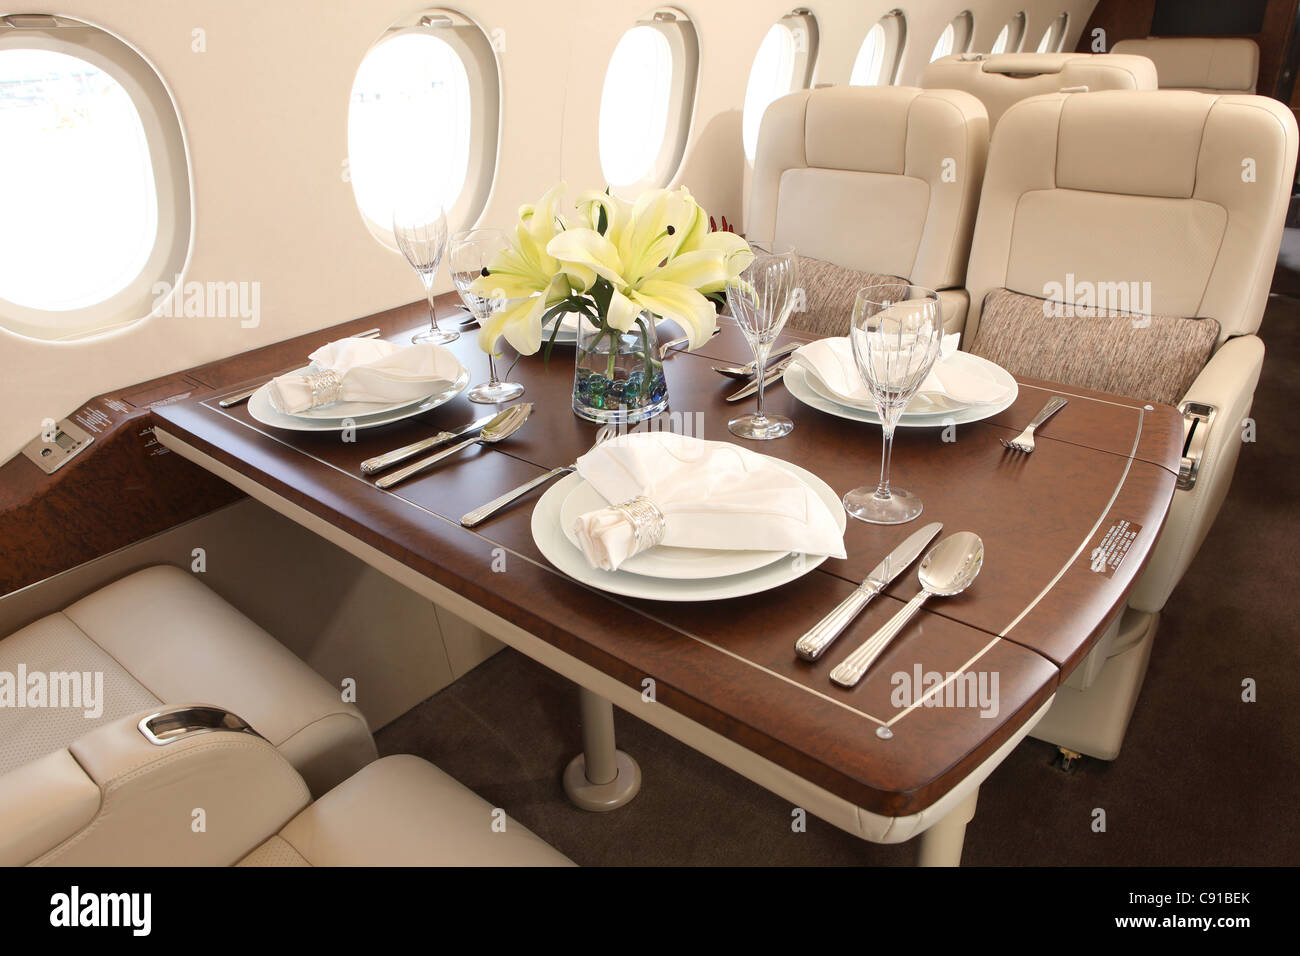 Interior Of A Private Jet Airplane Stock Photo 39983627